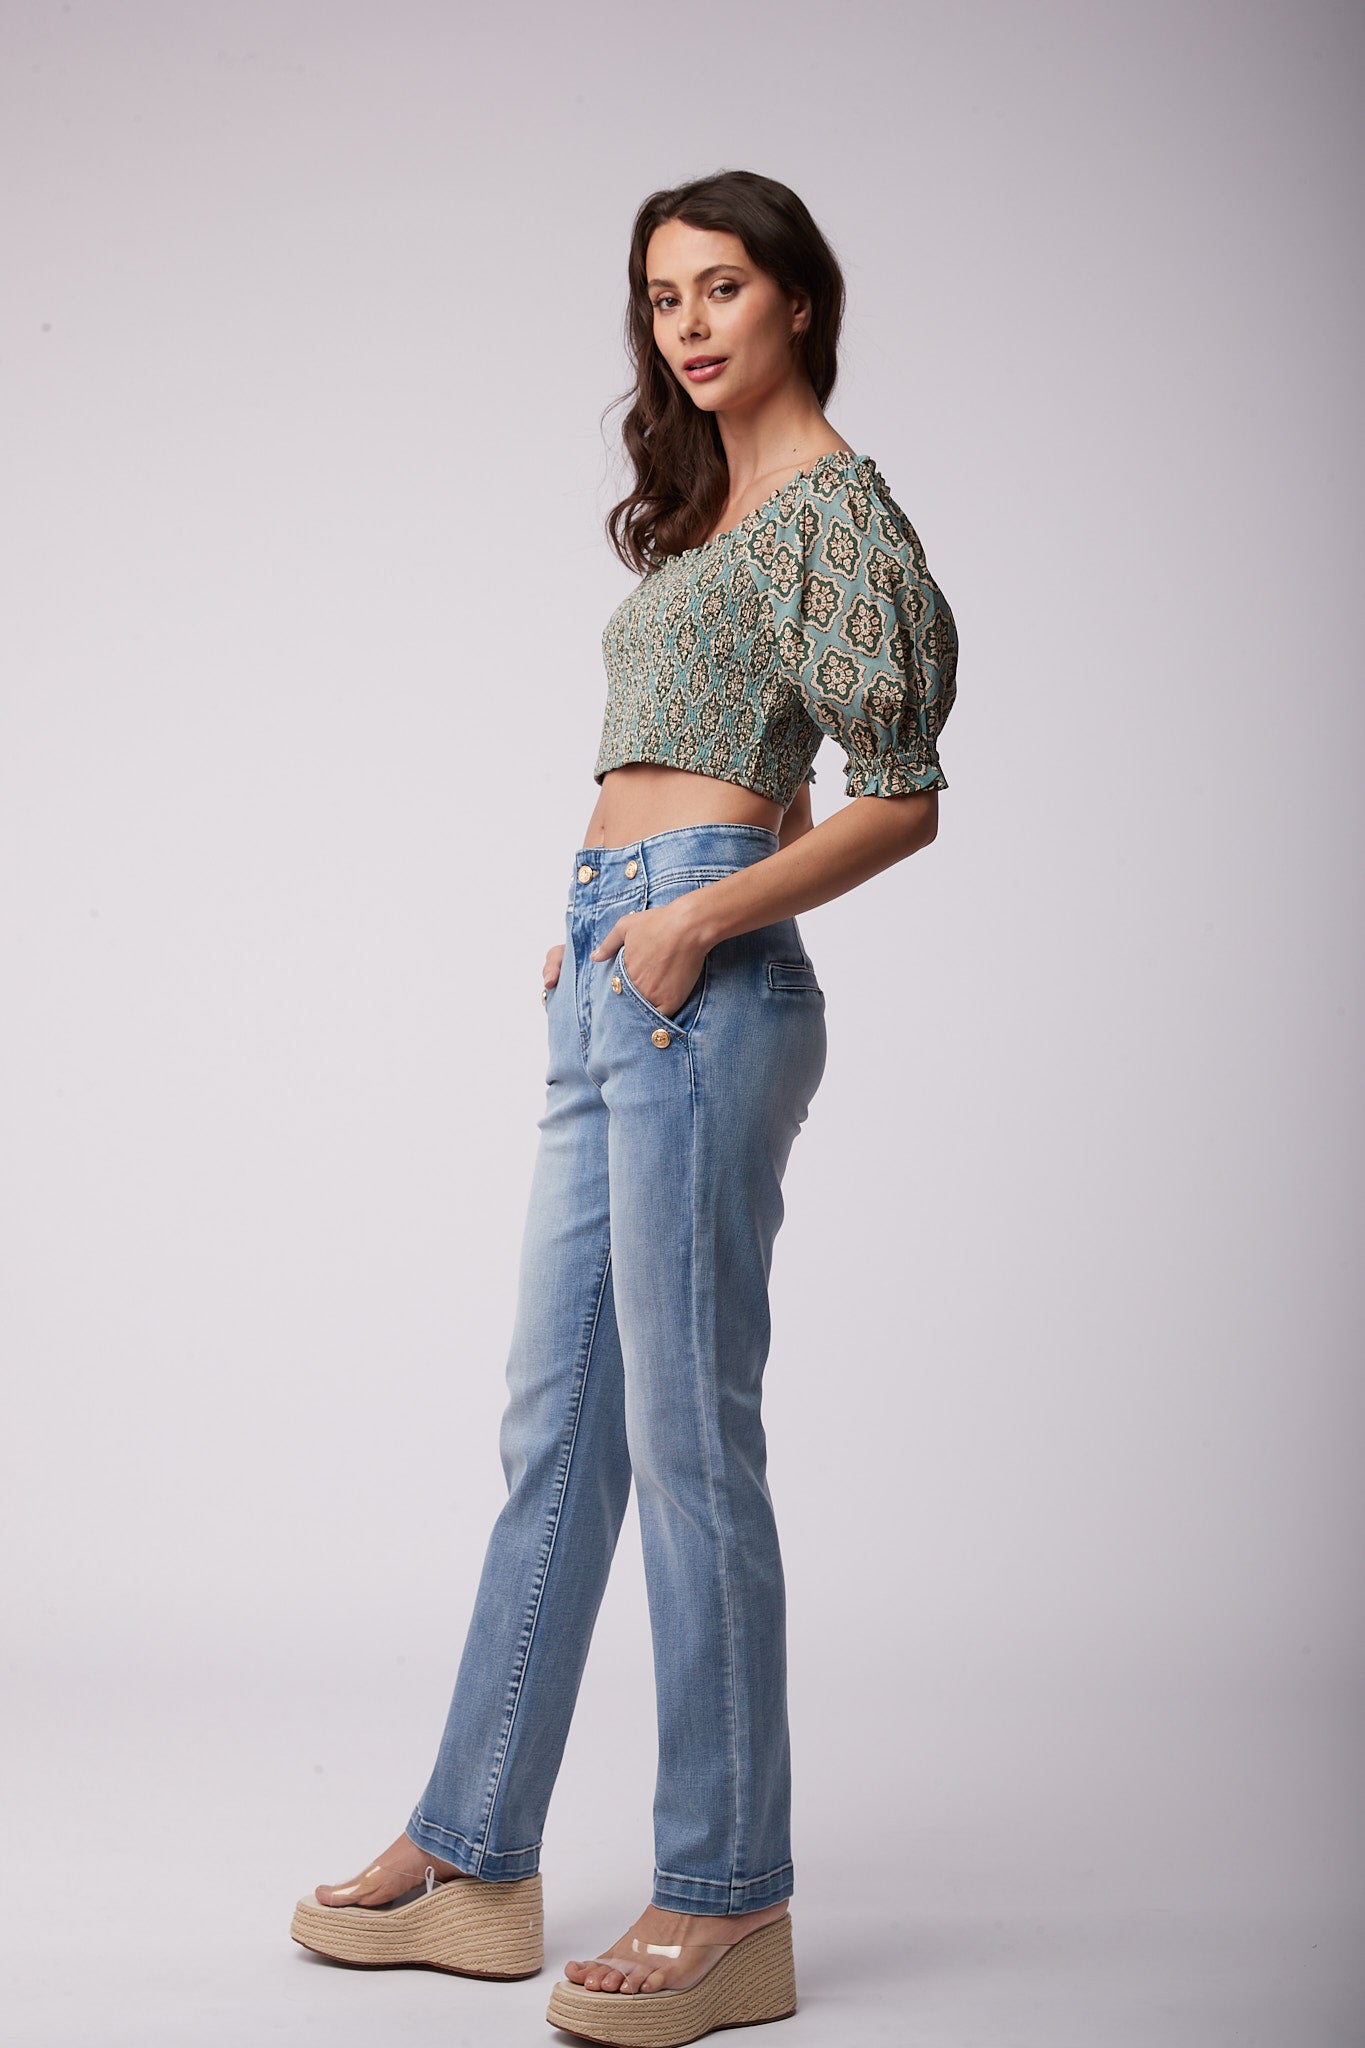 Denim trousers with gold buttons - Merveille